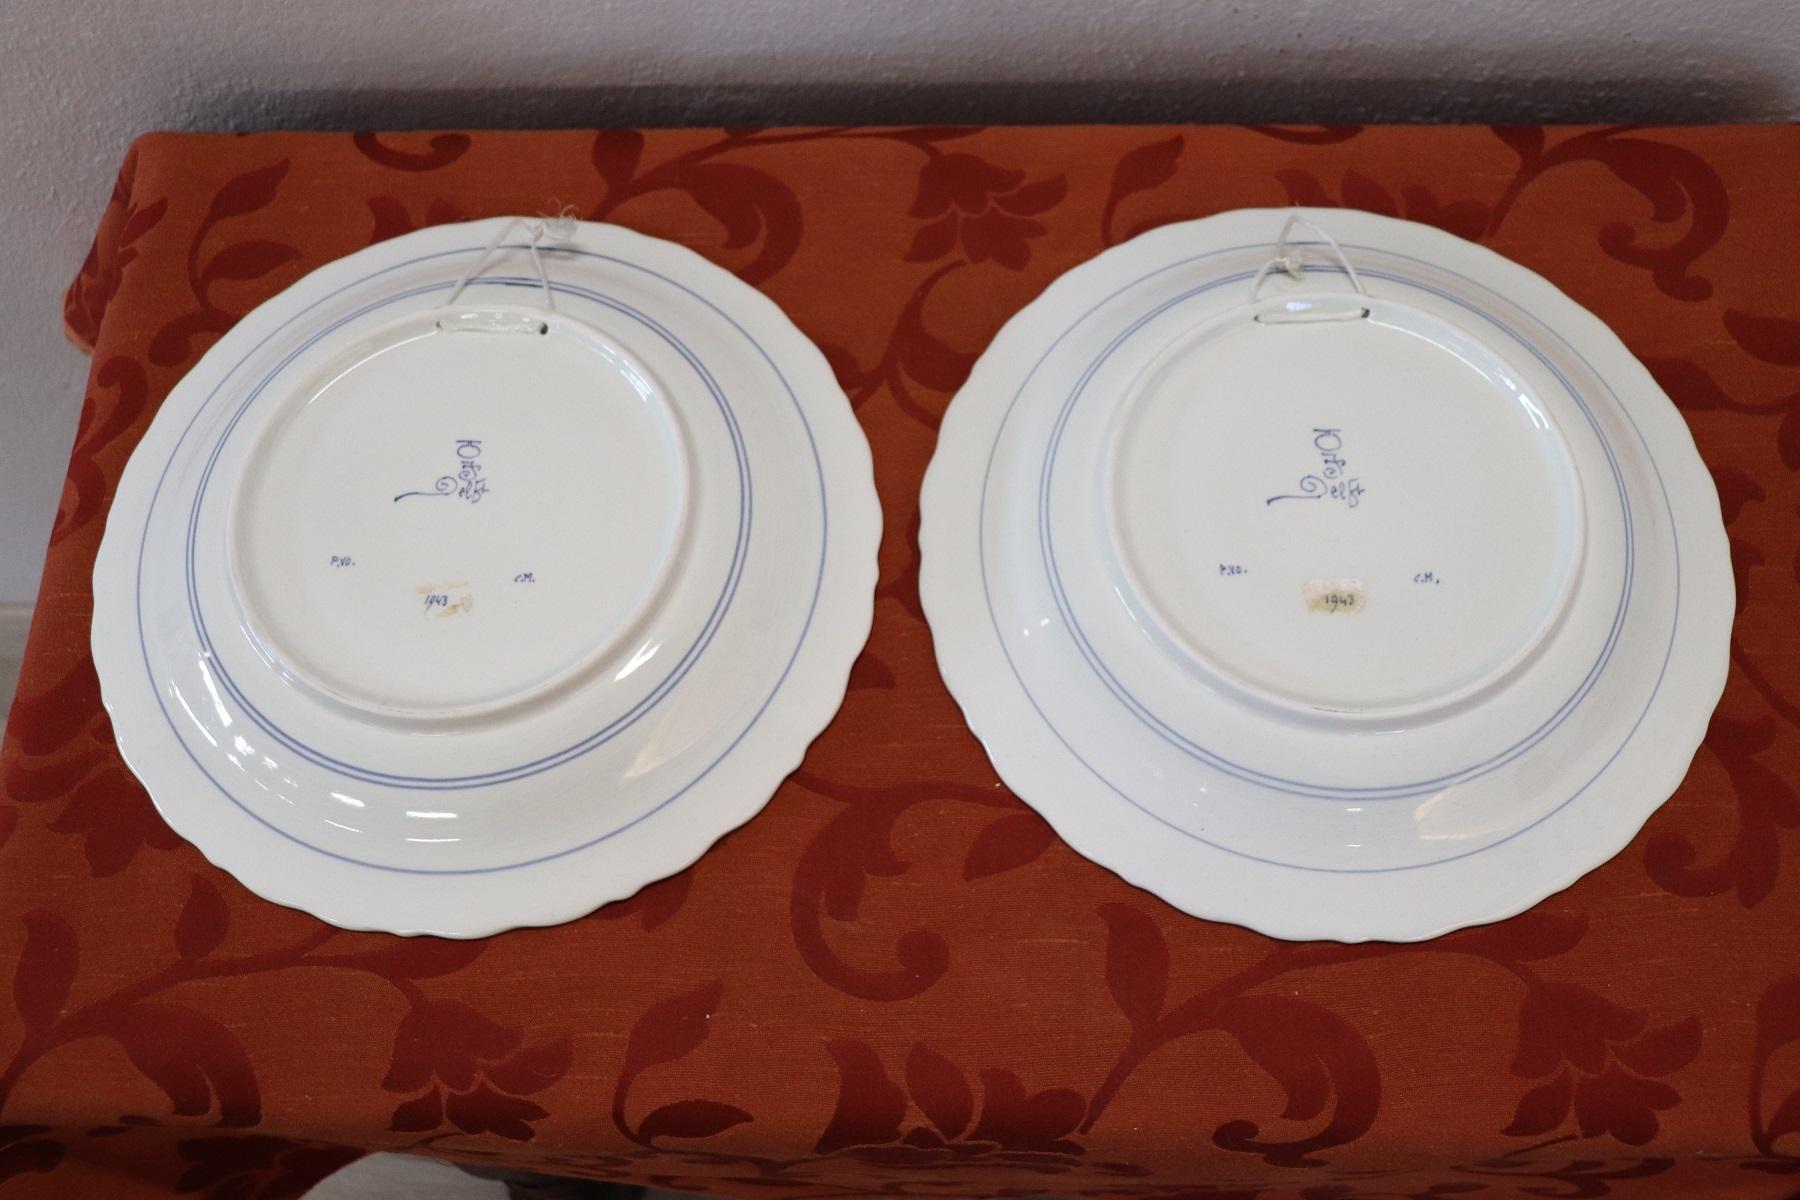 Hand-Painted 20th Century Holland Ceramic Platters with Blue Floreal Decorations by Delft